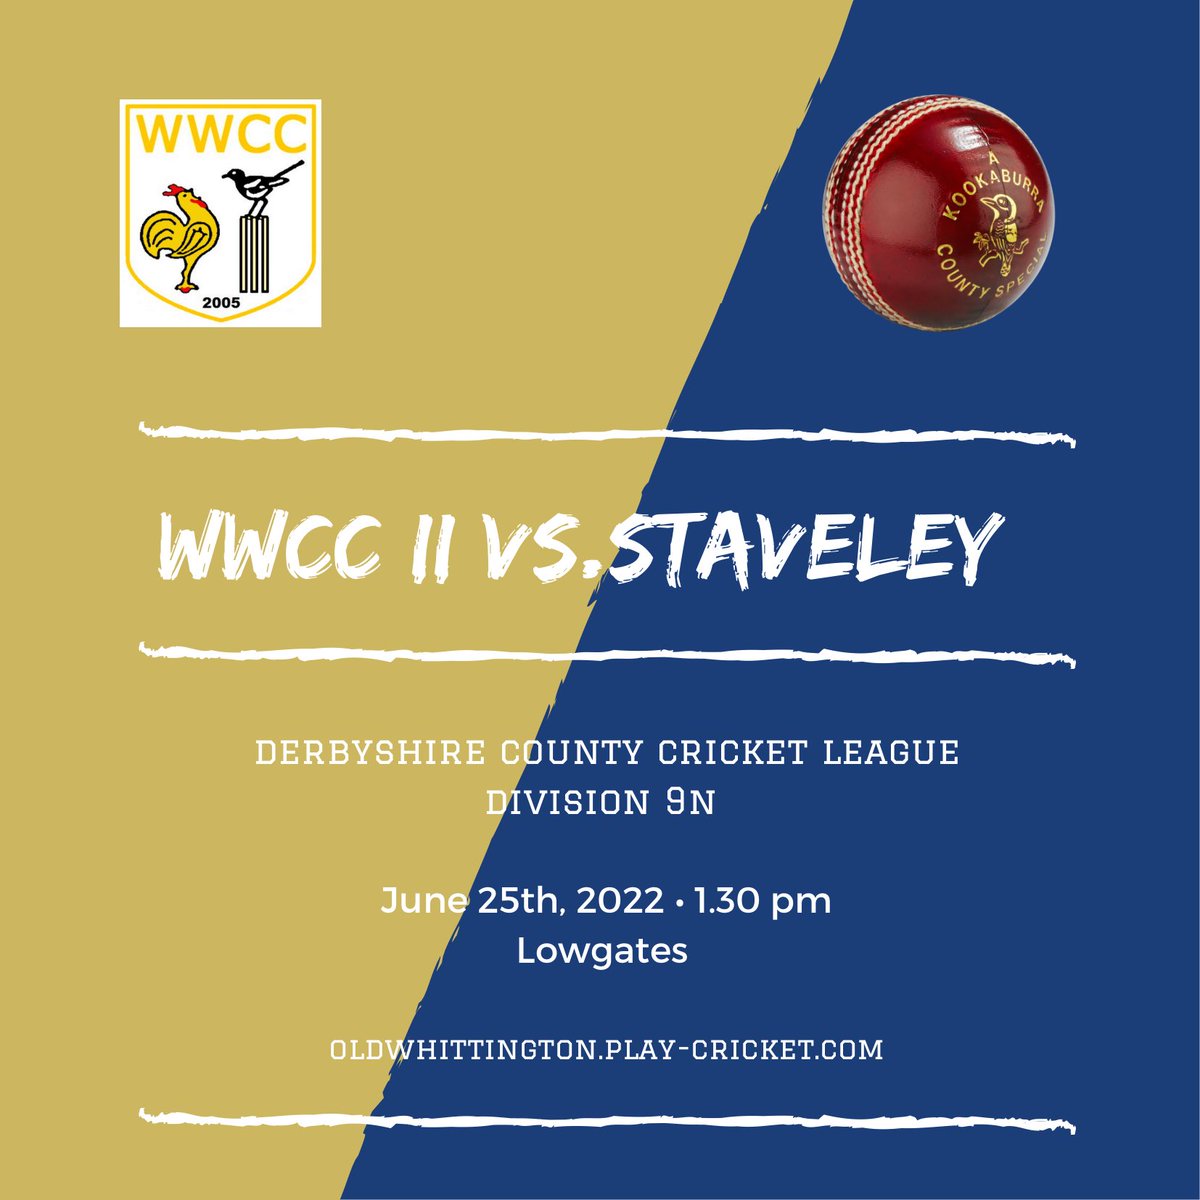 It’s another 🏏🏏 double header weekend! The 1sts welcome @StaveleyWelfare to the @GarageA1 pavilion as the 2nds travel to our near neighbours at Lowgates. #wanderers